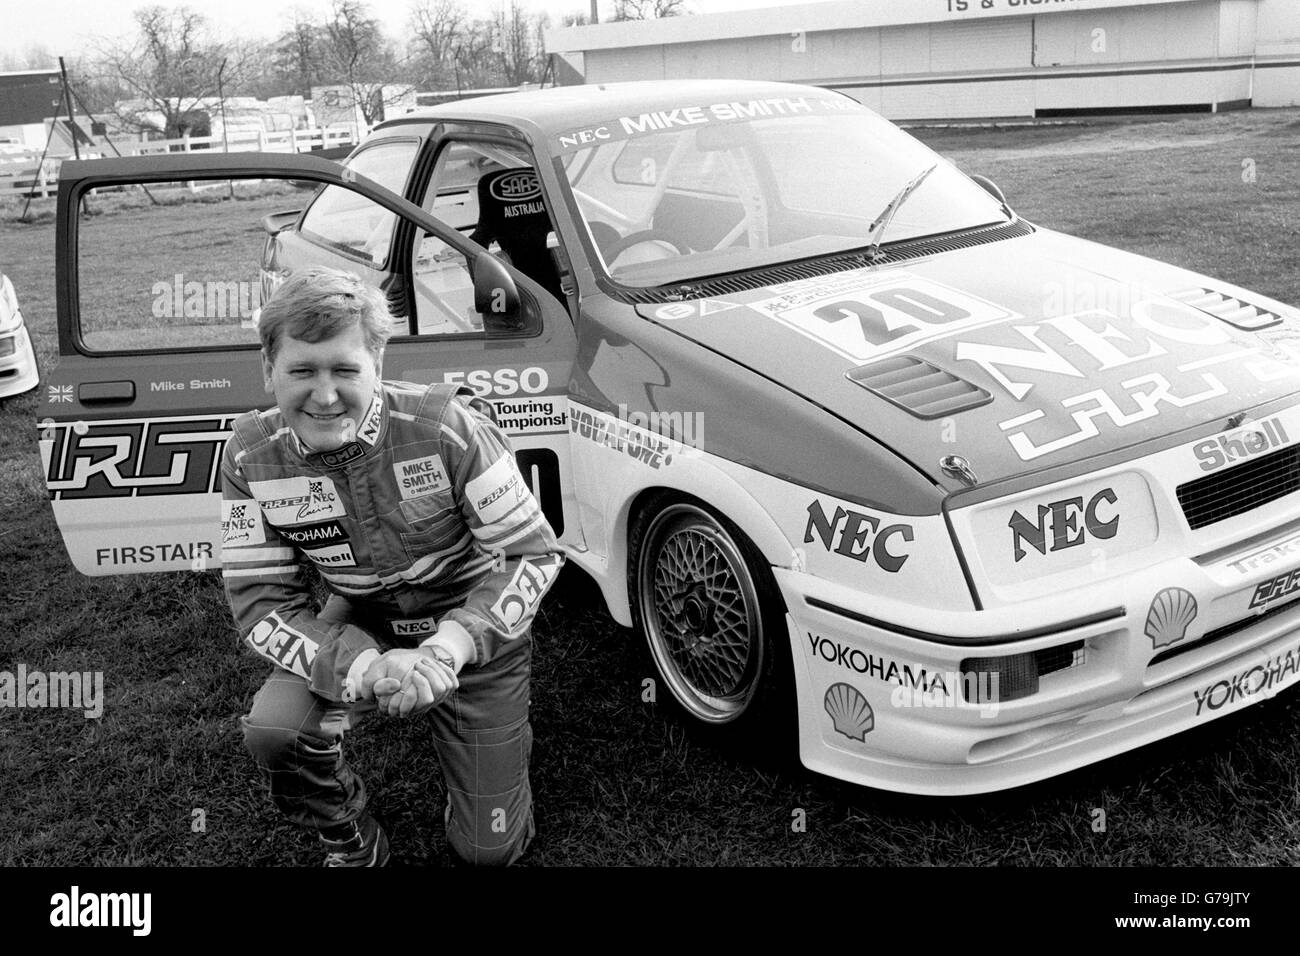 TV presenter Mike Smith poses with the 174mph Ford Sierra RS500 he is due to drive in the British Touring Car Championship. He flew into Oulton Park race circuit in a helicopter - the first time he has flown one since his near-fatal crash last year. Stock Photo